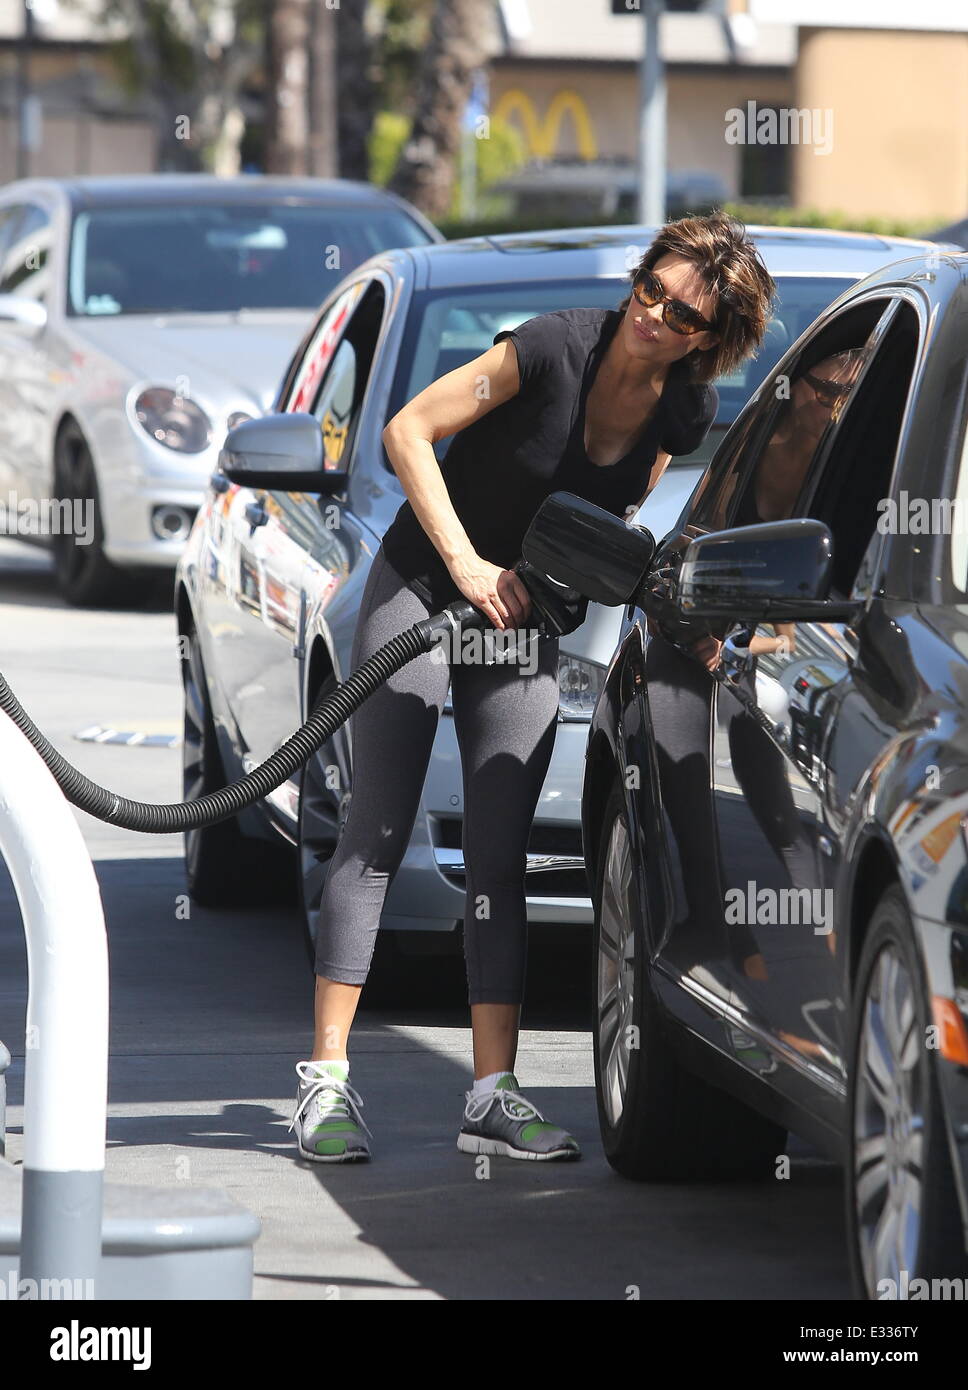 Lisa Rinna seen pumping gas into her car in Studio City Featuring